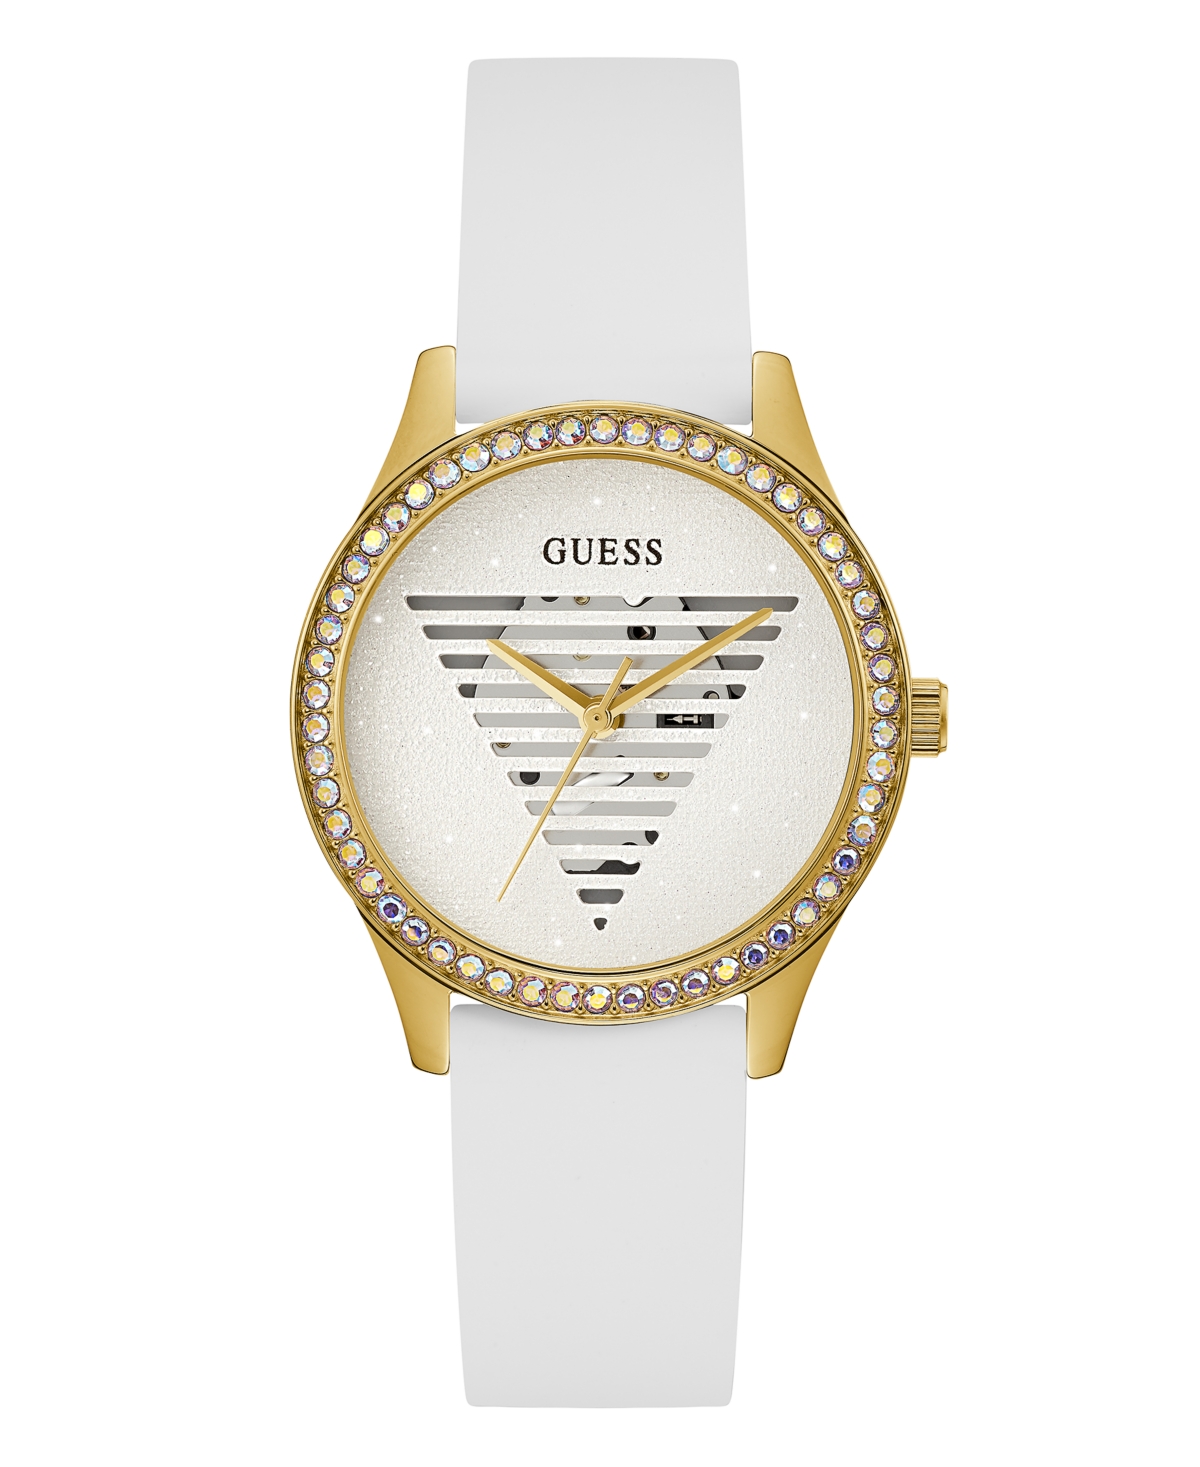 Guess Women's Analog White Silicone Watch 38mm